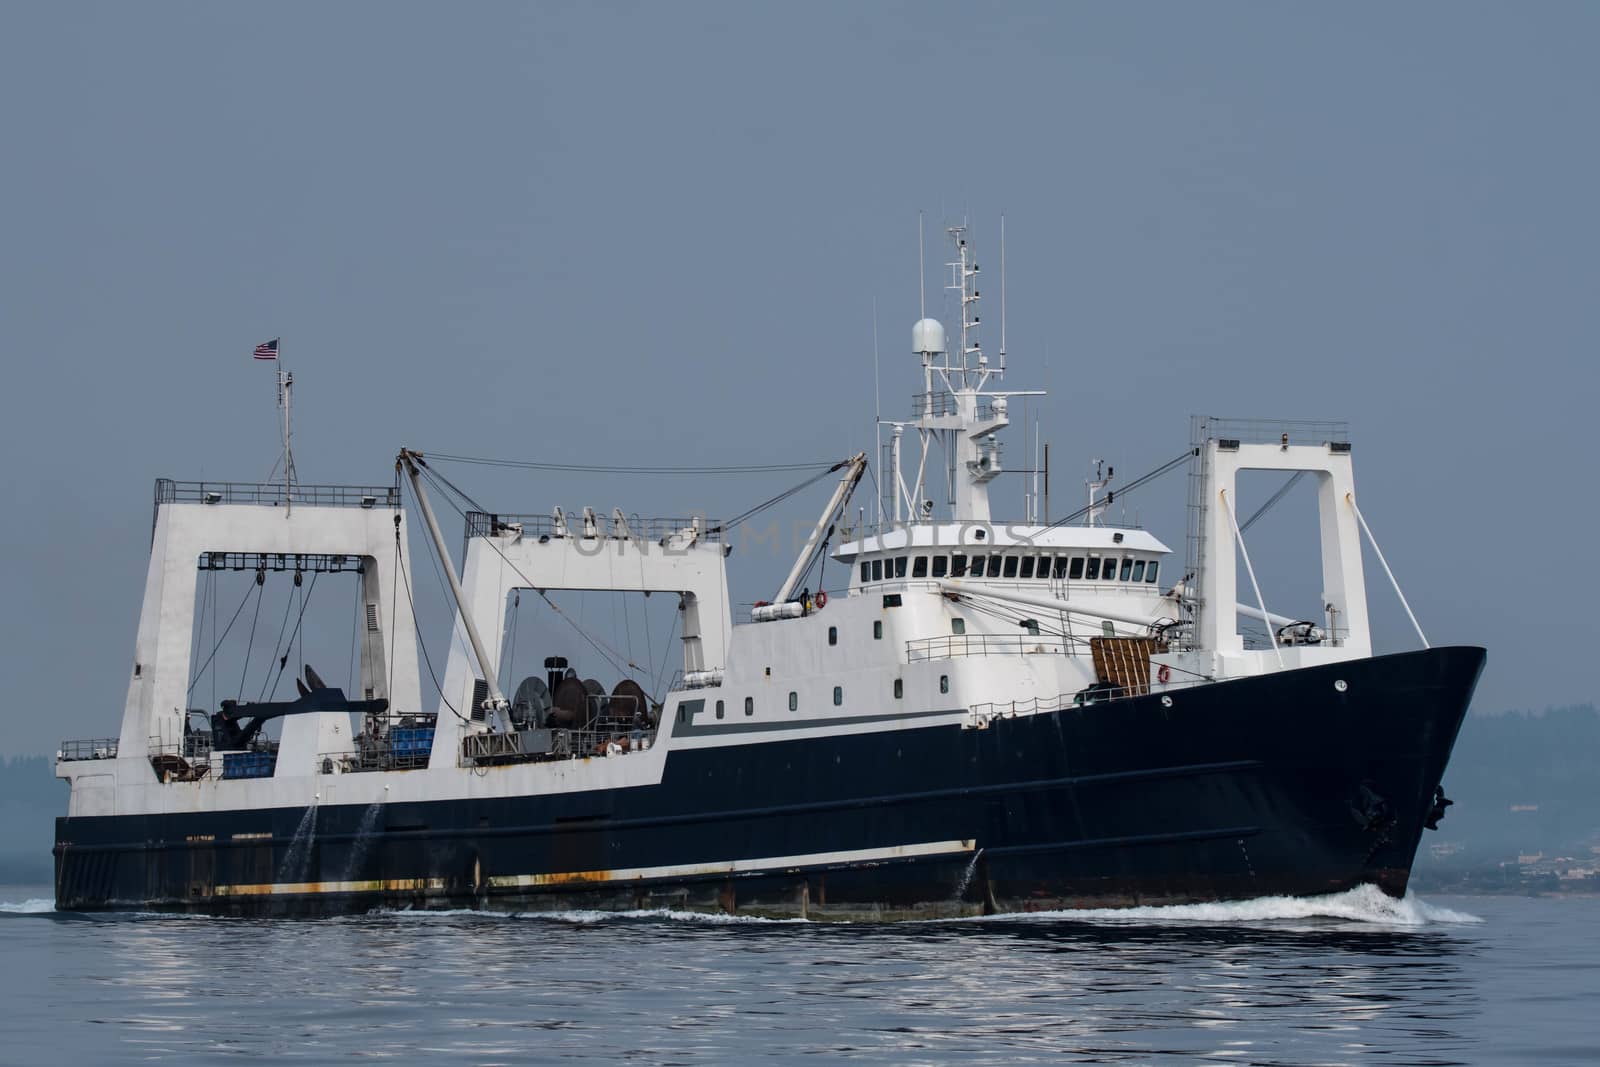 Factory Trawler underway on Puget Sound by cestes001